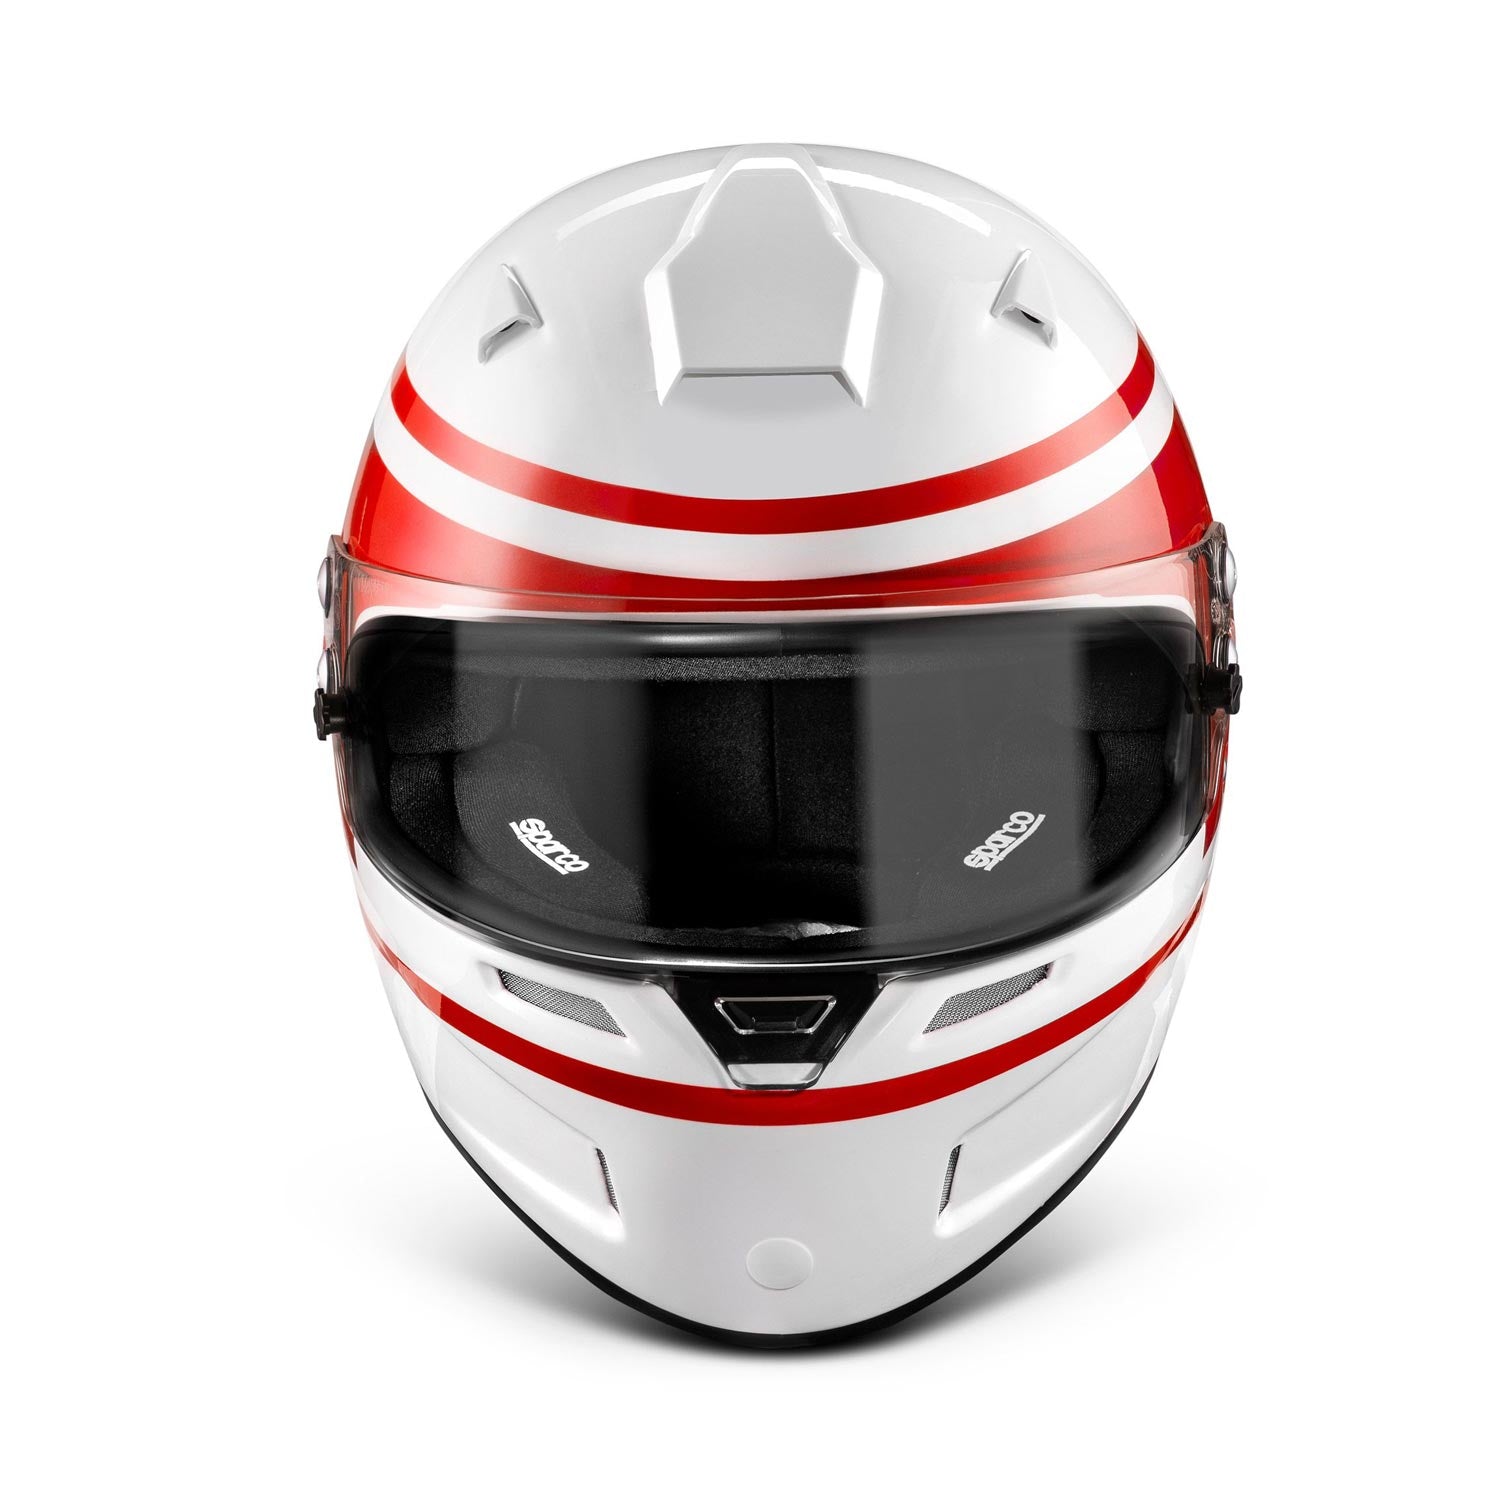 SPARCO 003375RS2M RF-5W 1977 Racing helmet full face, FIA/SNELL SA2020, red/white, size M (57-58) Photo-1 